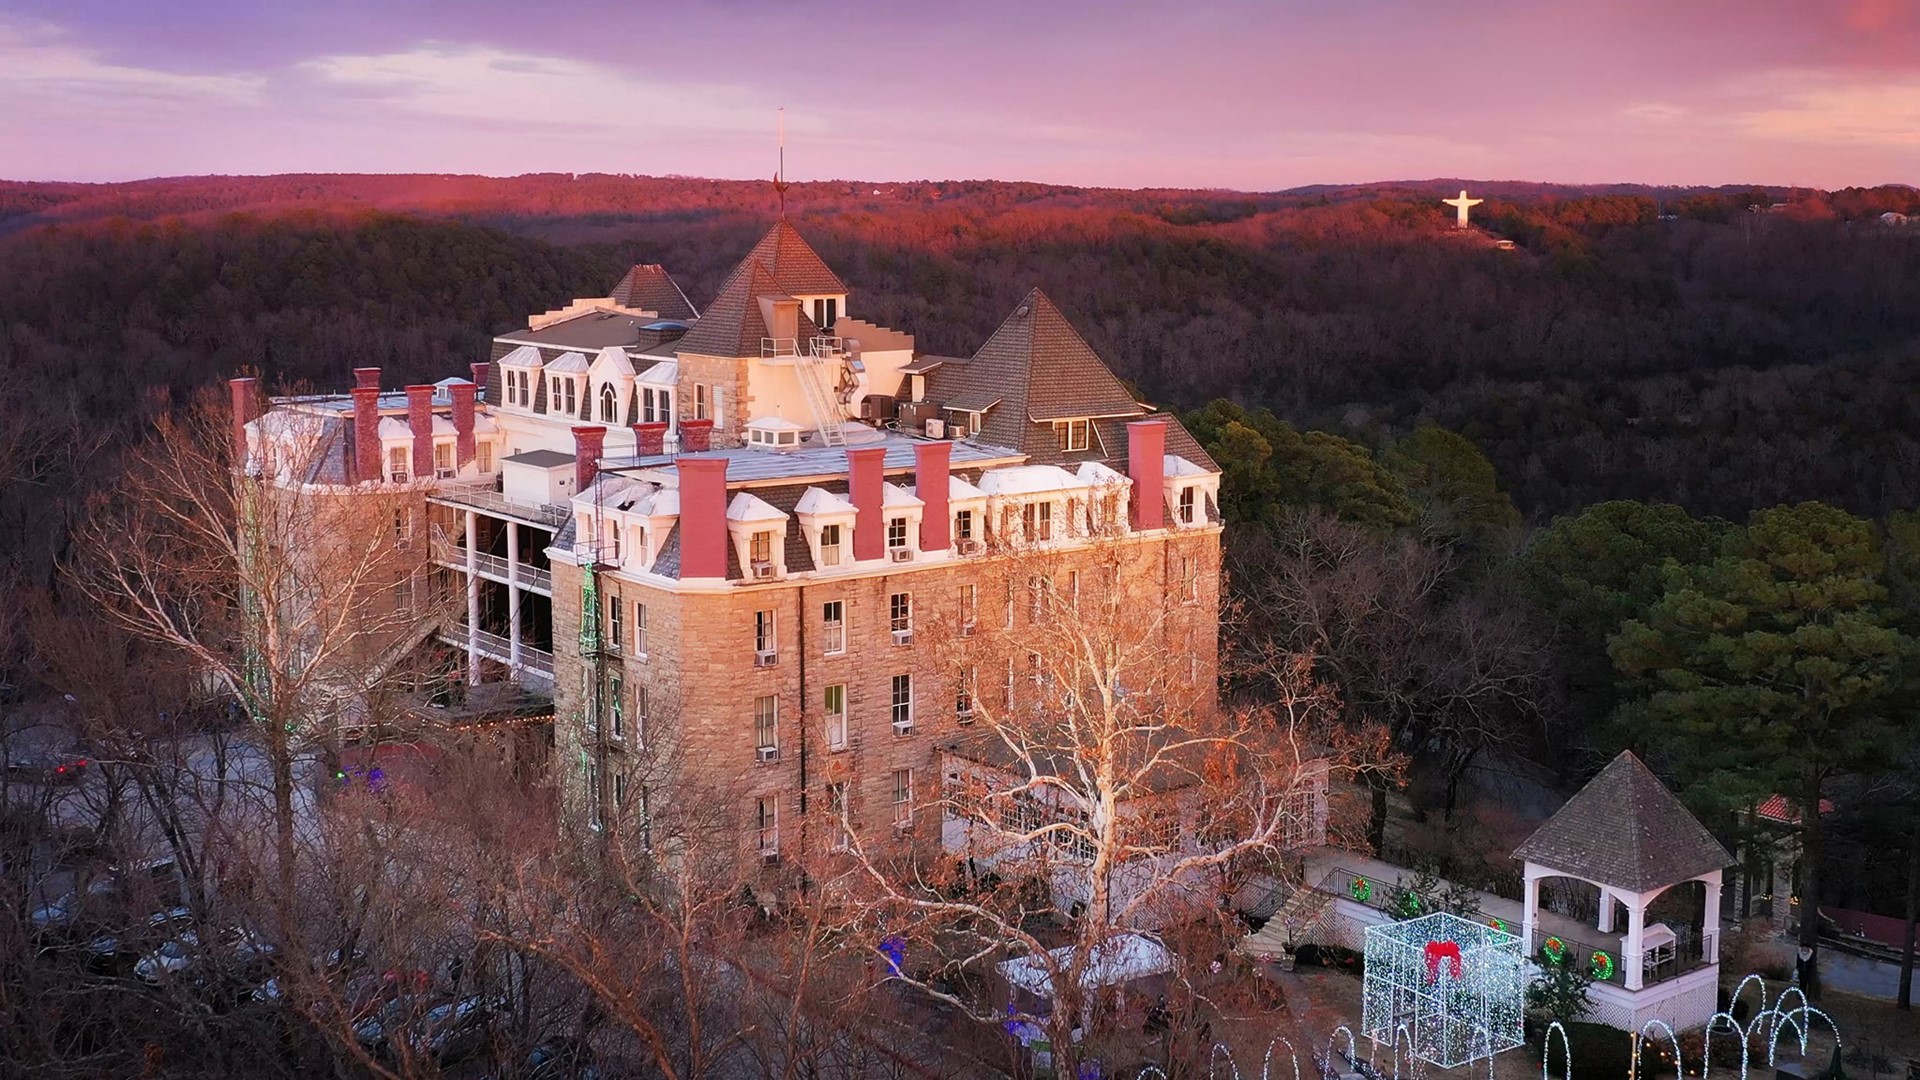 Located in the cozy town of Eureka Springs, the Crescent Hotel is known not only for its historic Victorian beauty but for its active array of spirits.